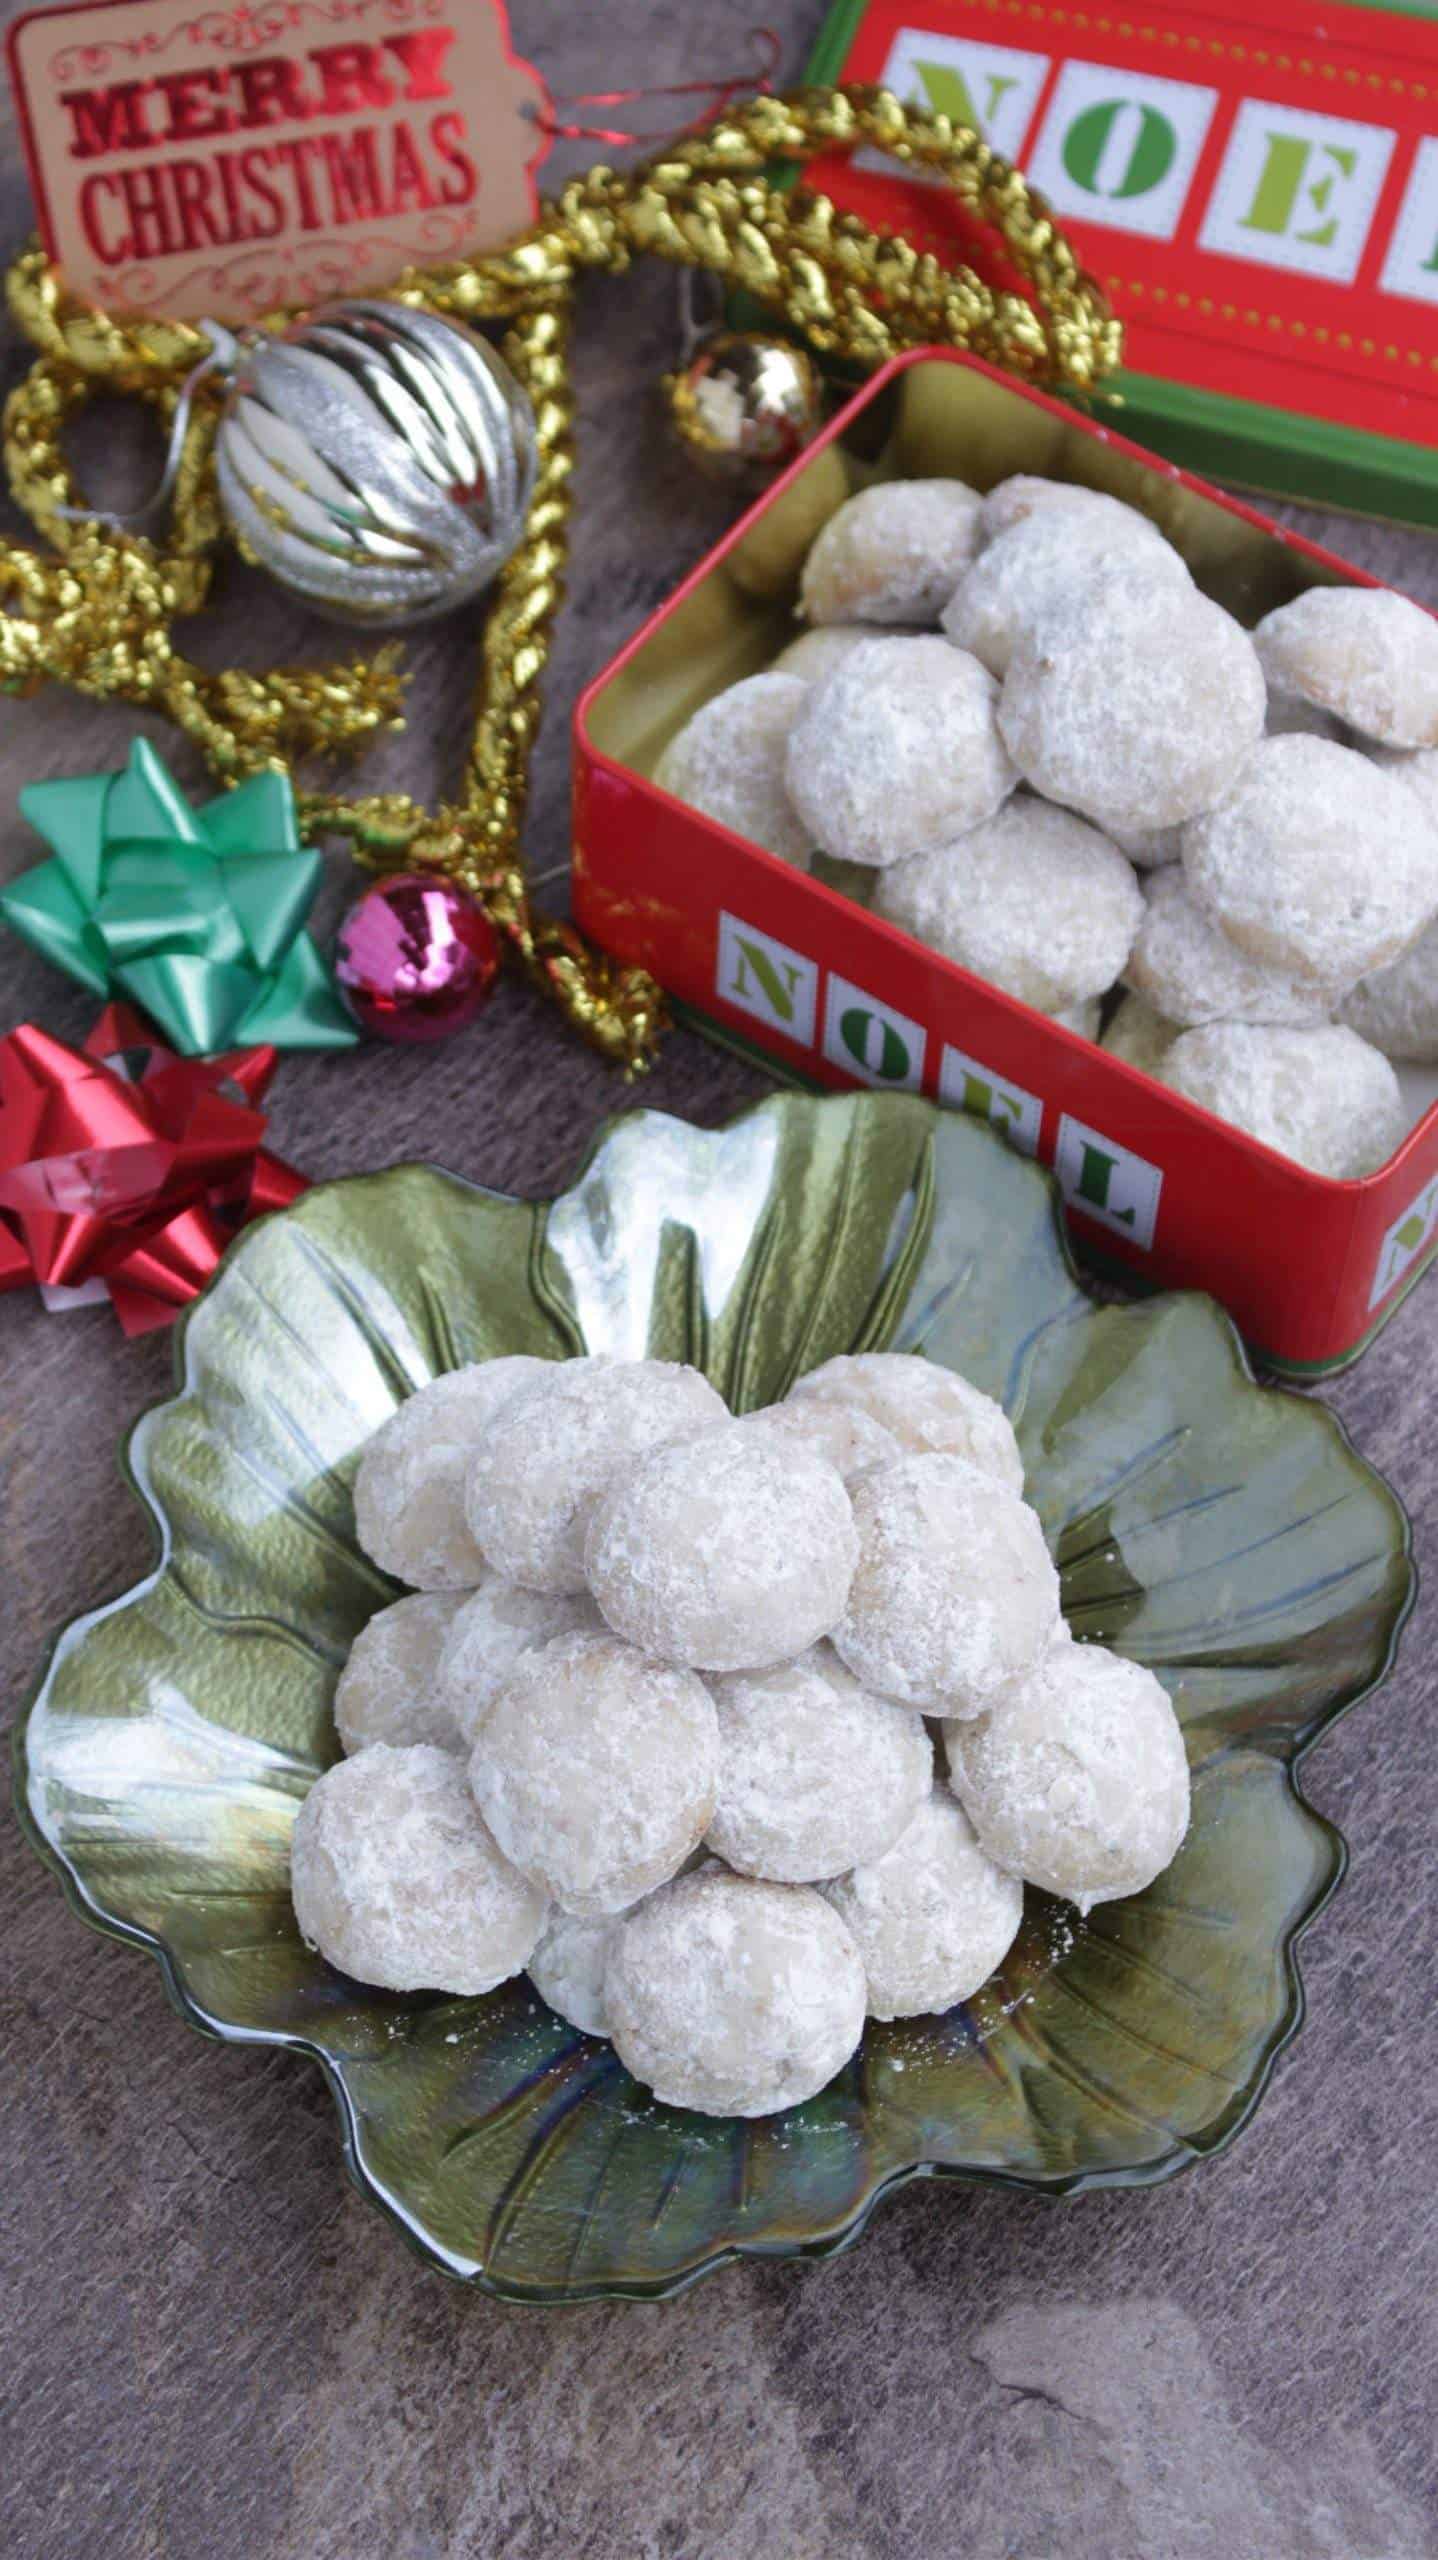 Mexican Wedding Cookies for Holidays